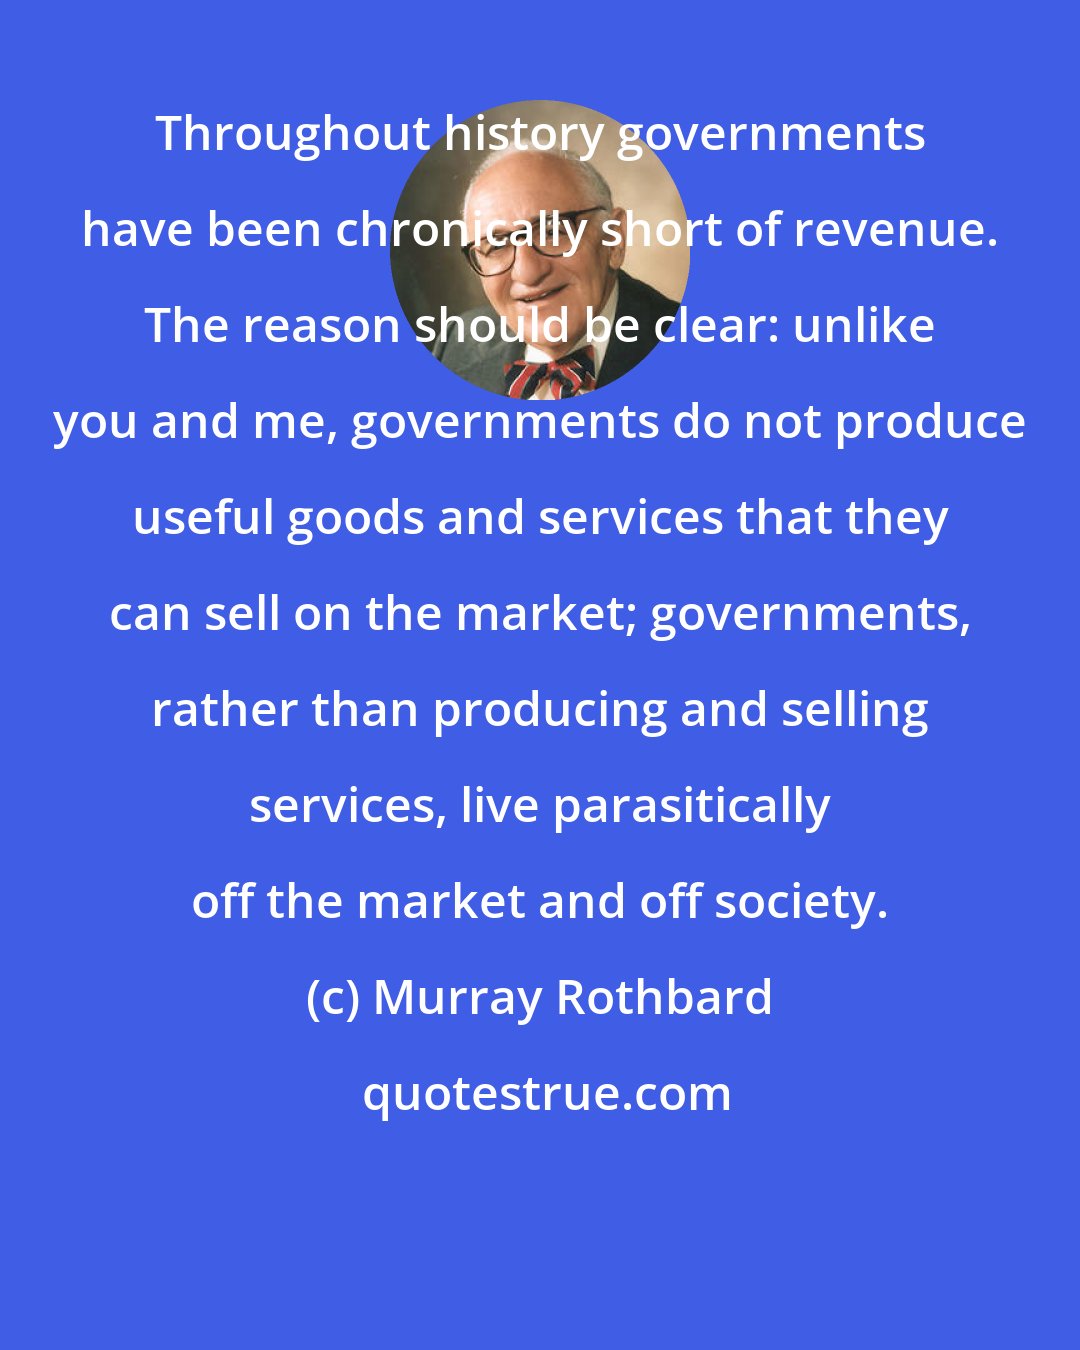 Murray Rothbard: Throughout history governments have been chronically short of revenue. The reason should be clear: unlike you and me, governments do not produce useful goods and services that they can sell on the market; governments, rather than producing and selling services, live parasitically off the market and off society.